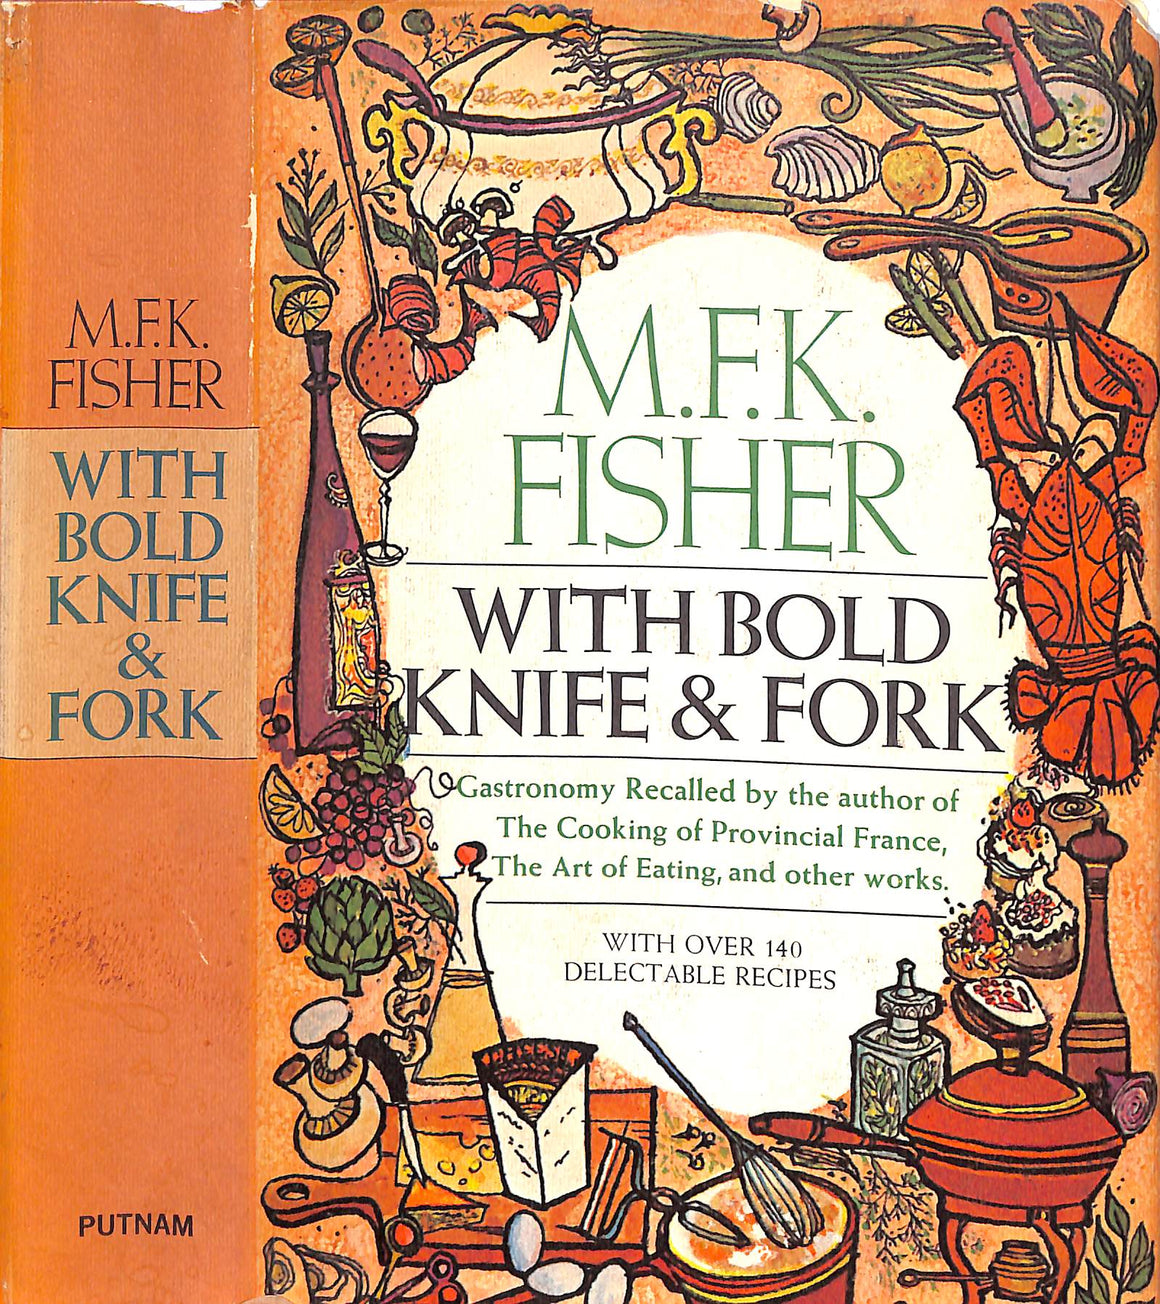 "With Bold Knife & Fork" 1969 FISHER, M.F.K.